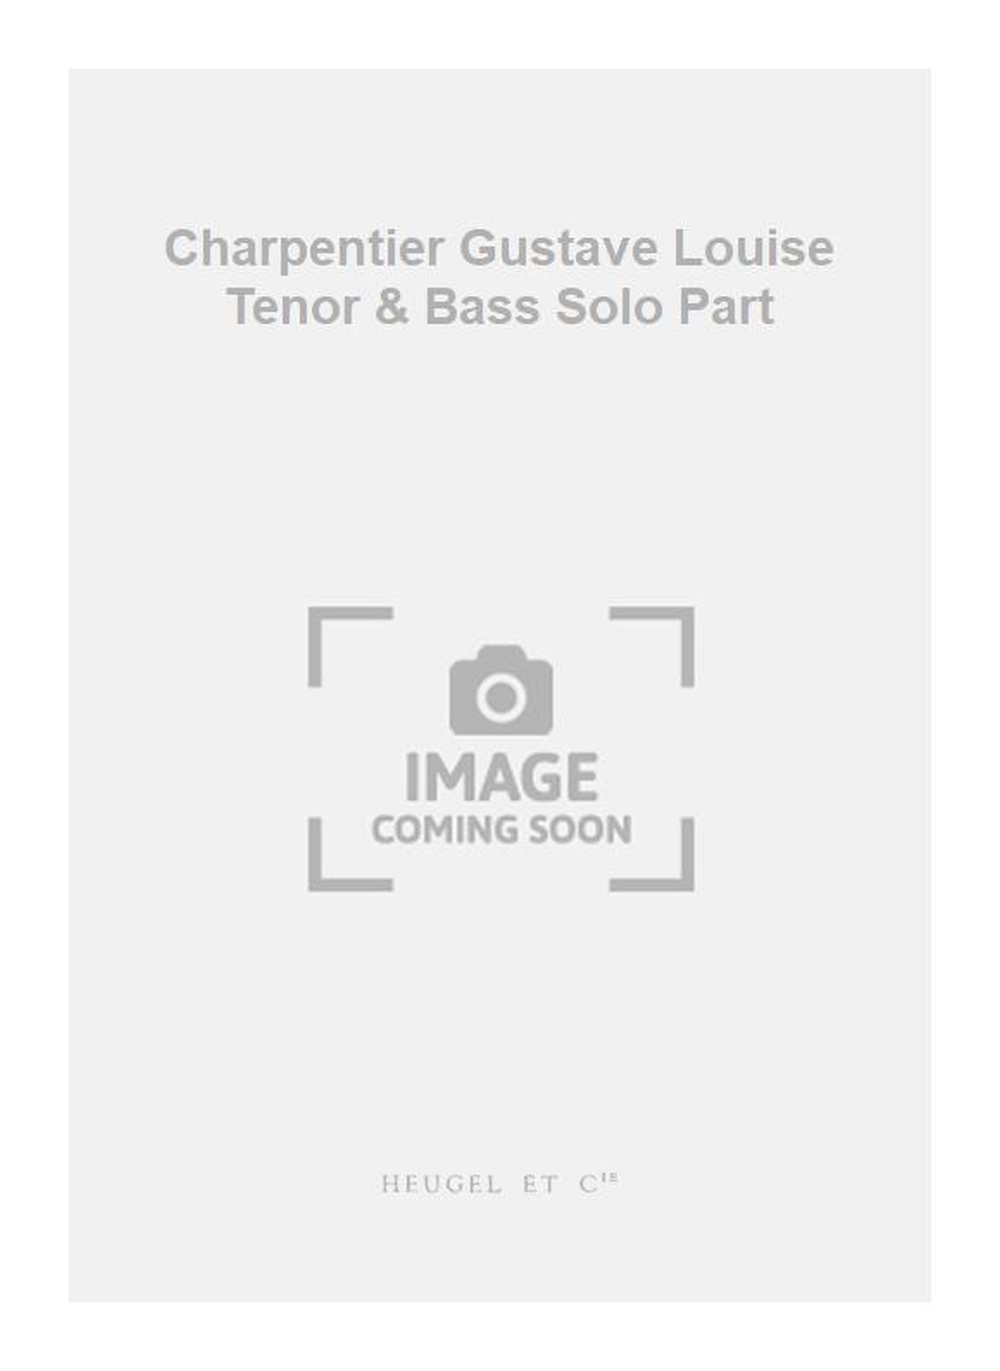 Gustave Charpentier: Charpentier Gustave Louise Tenor & Bass Solo Part